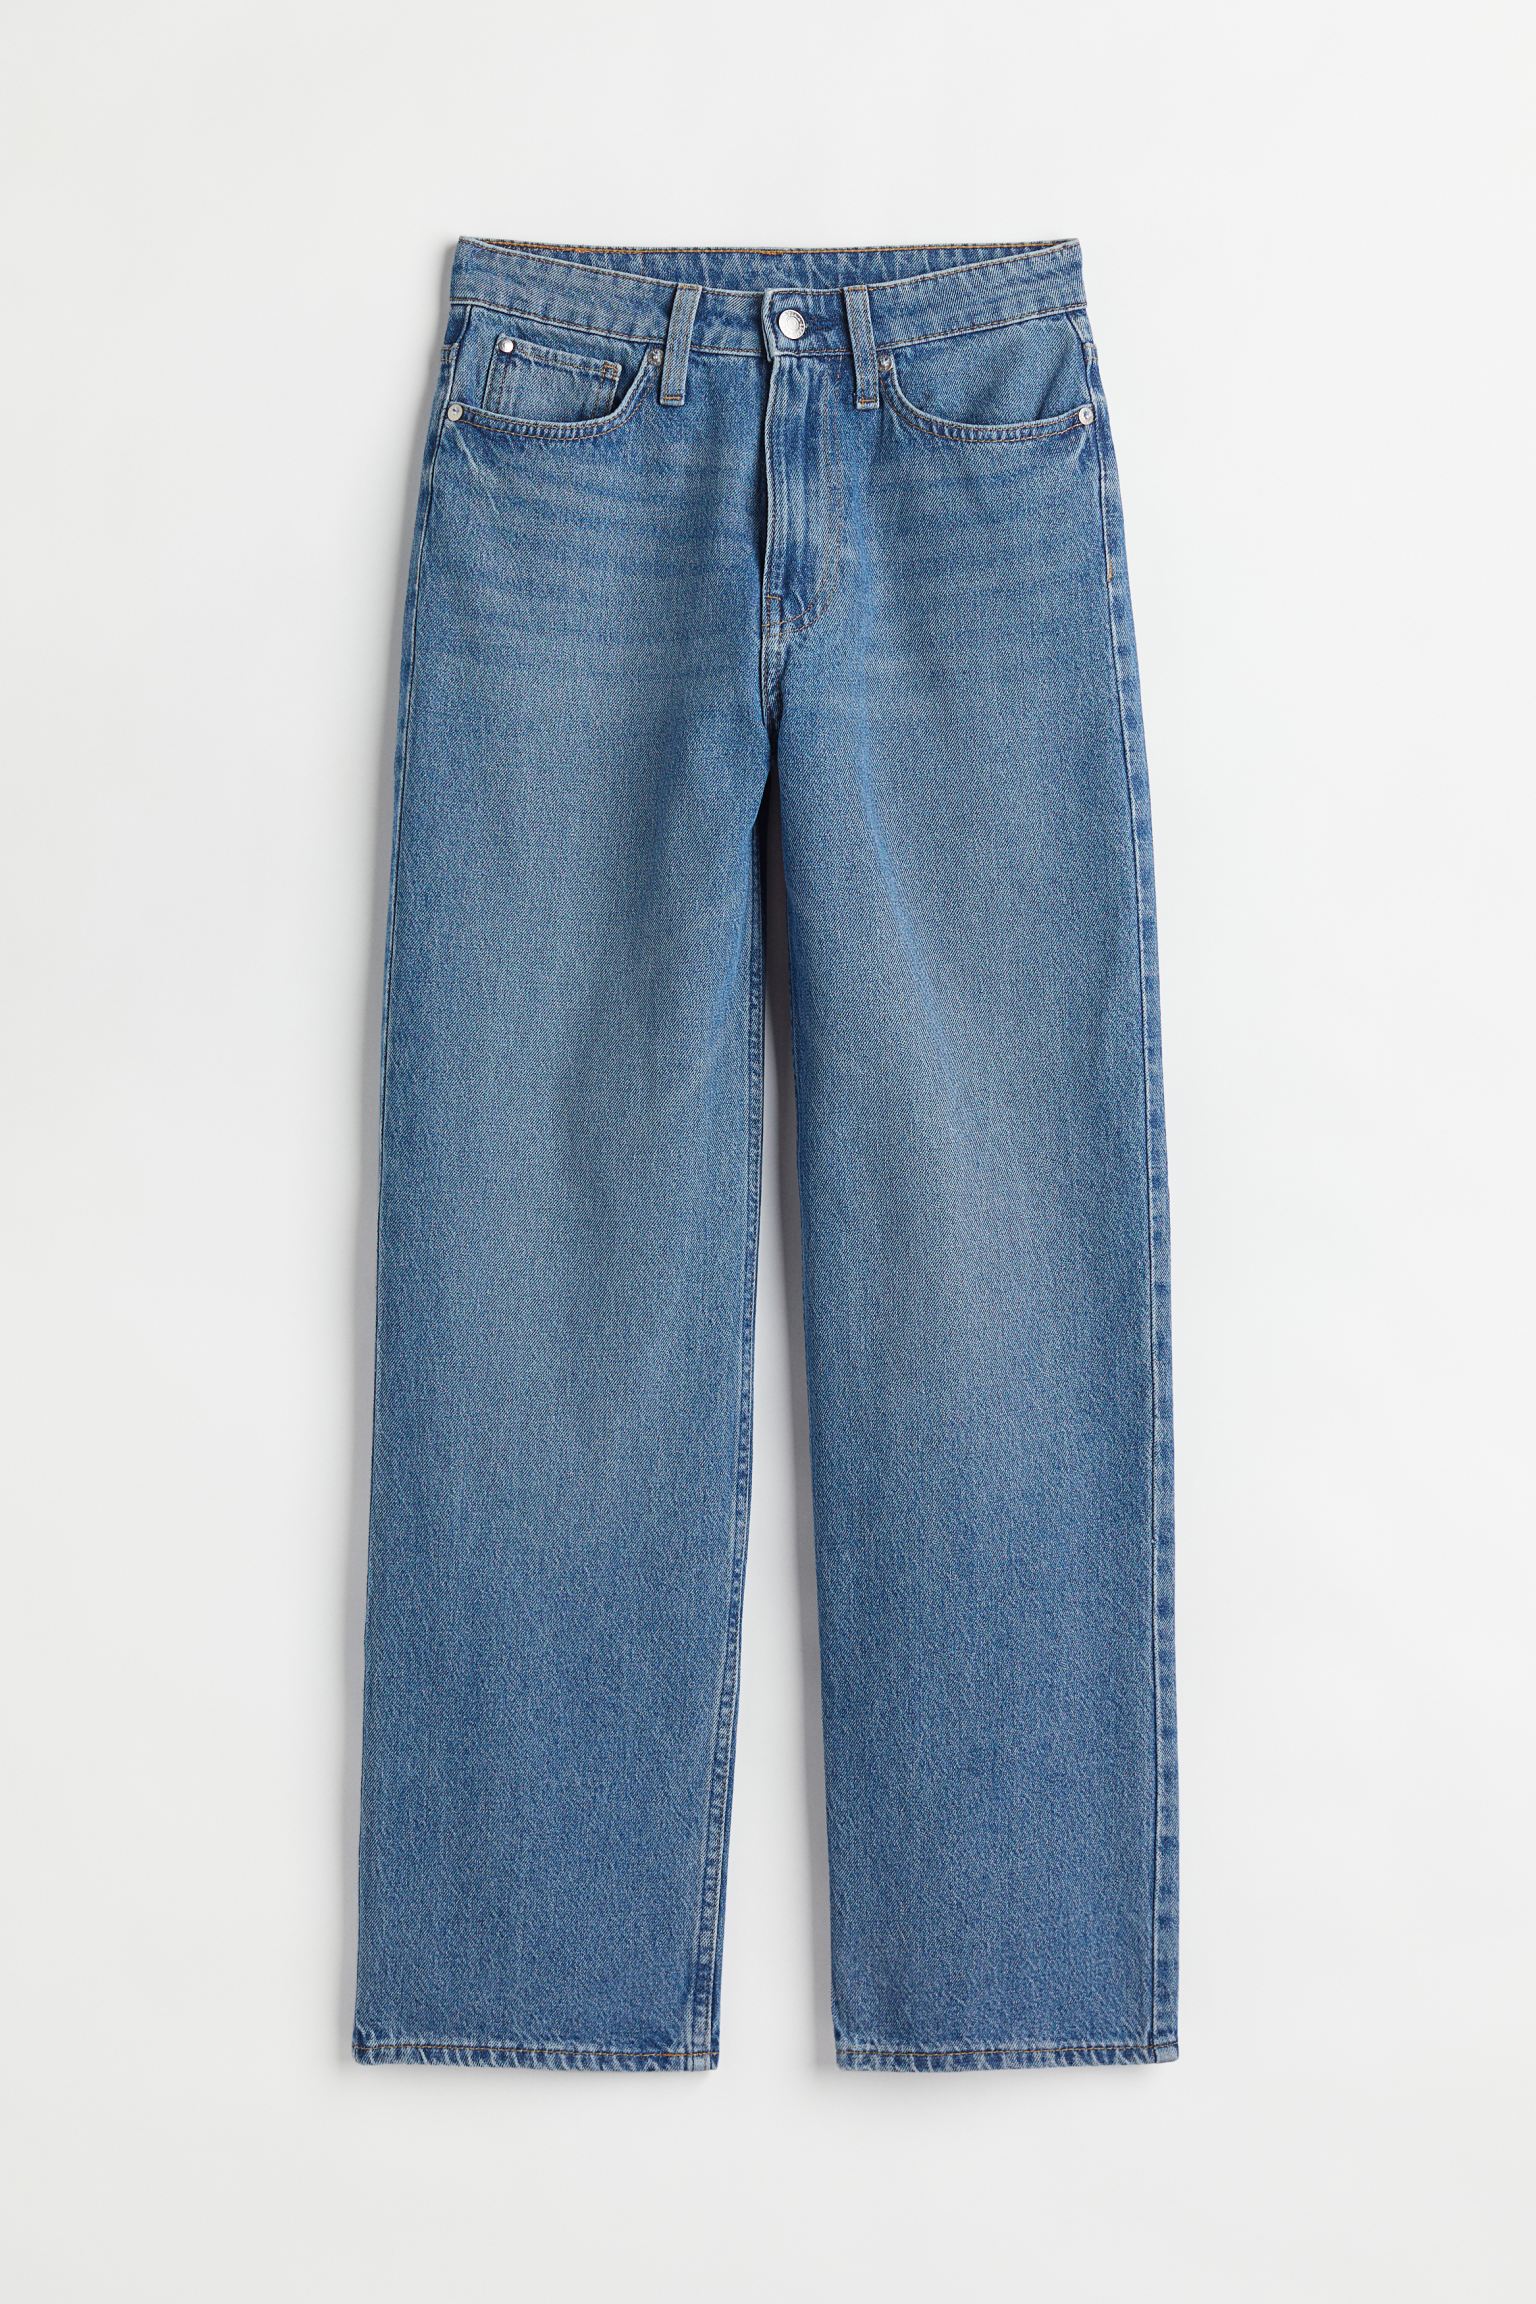 H&M Loose Straight High Jeans